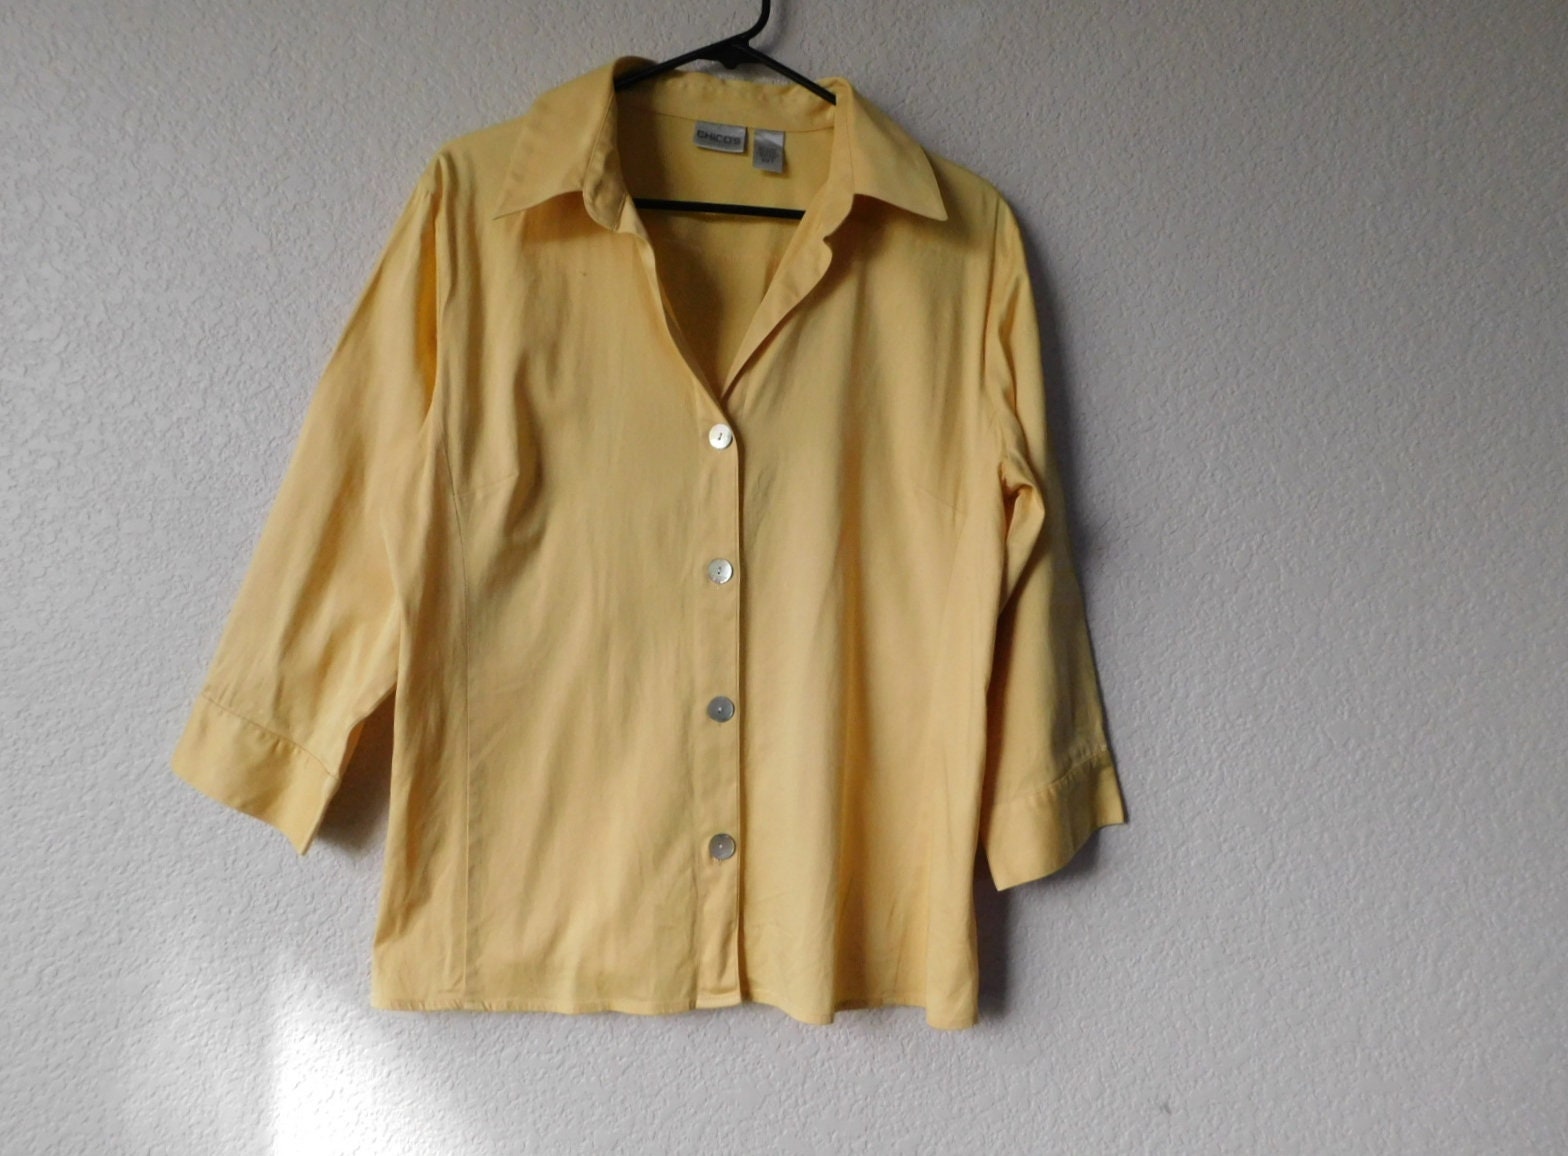 Chico's Size 2 Women's Yellow Cotton Blend Blouse/3/4 Sleeve Shell Buttons Blouse/Yellow Stretchable Blouse